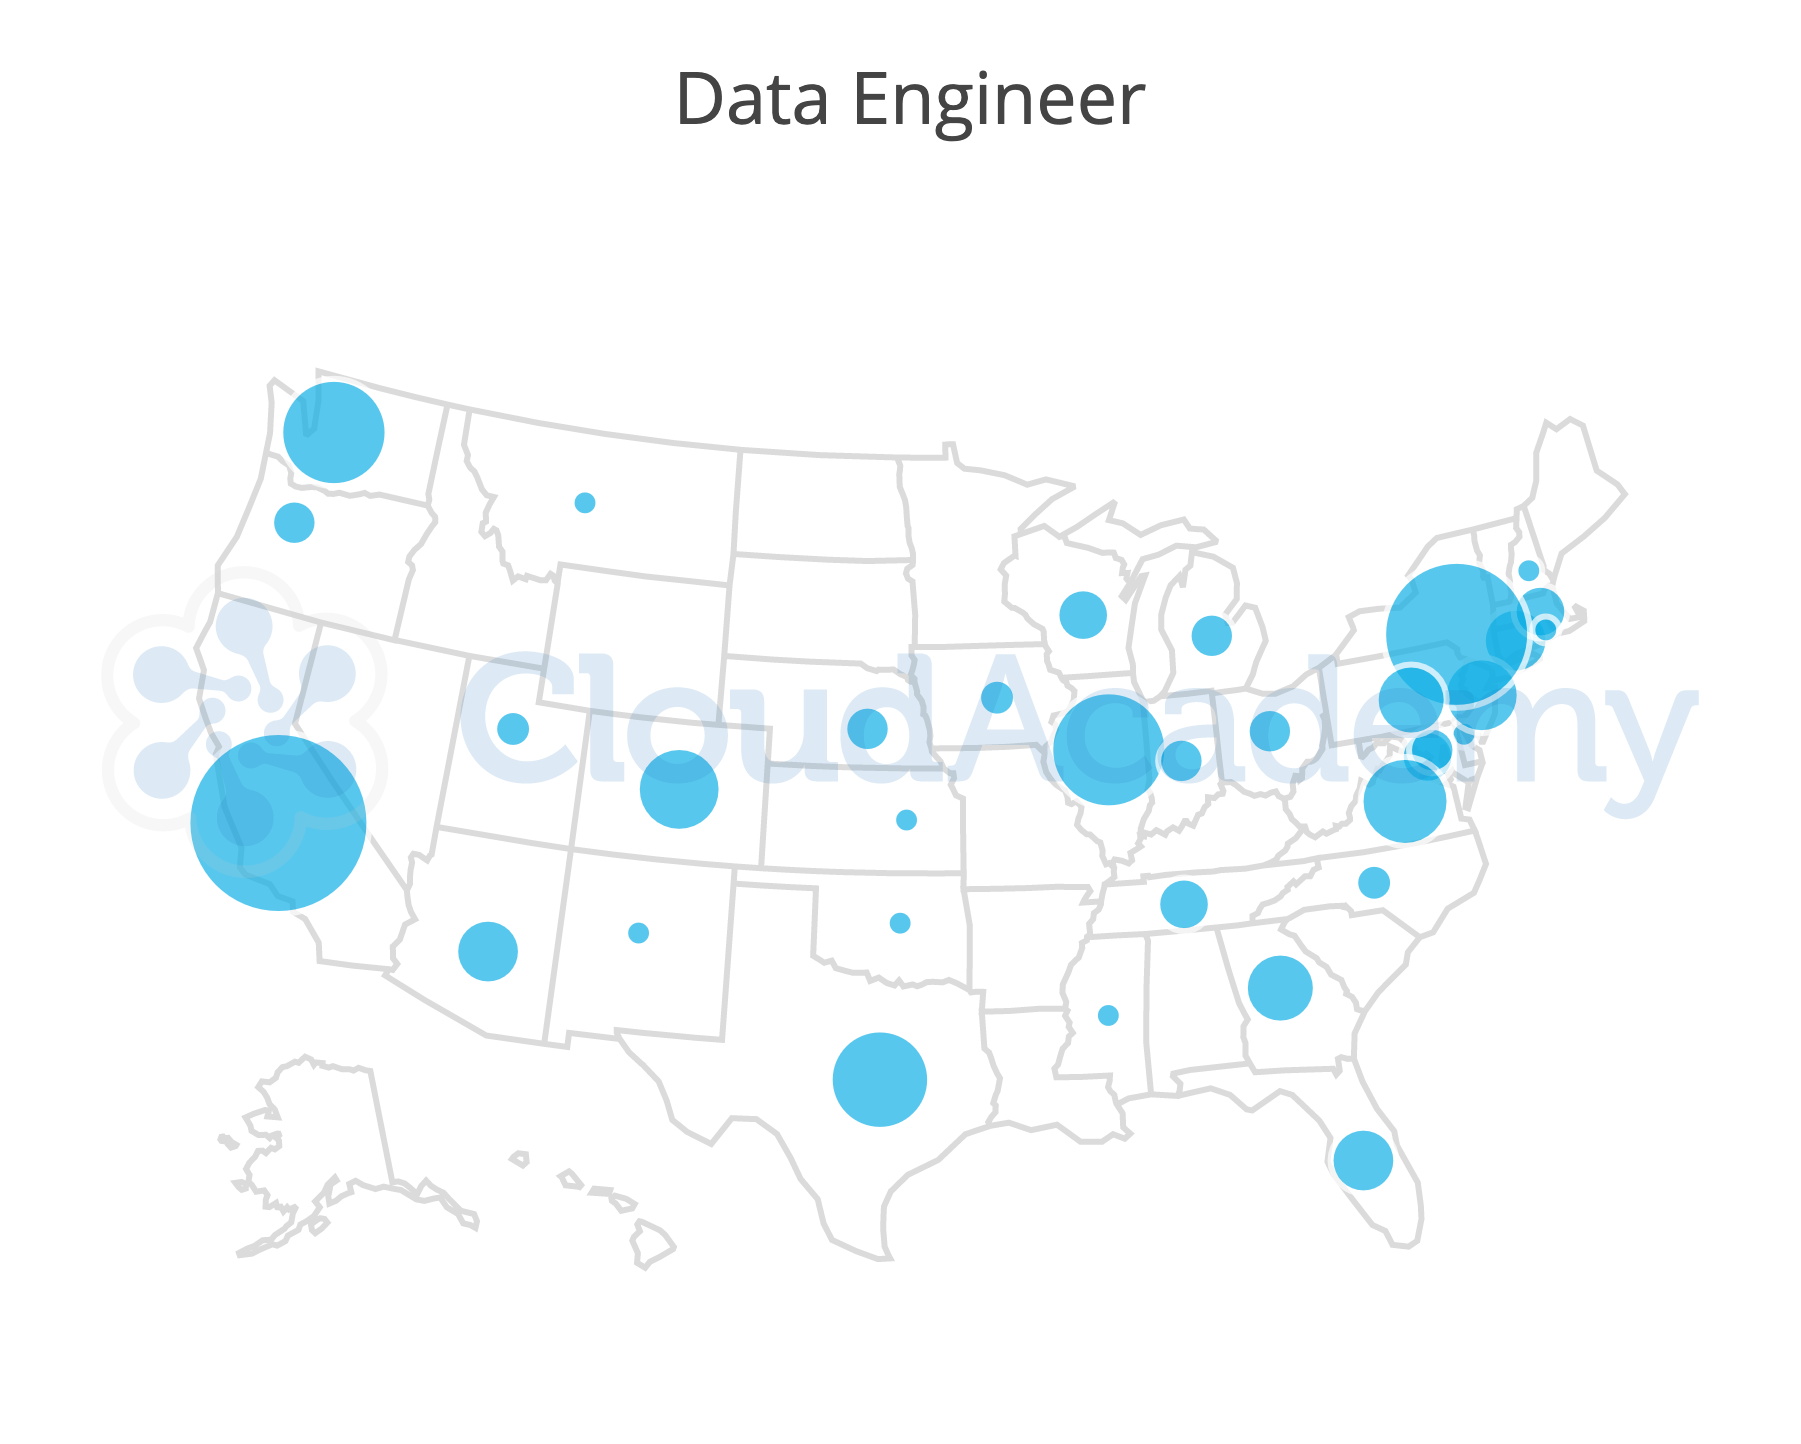 Relative number of data engineer jobs in the U.S., most recent week